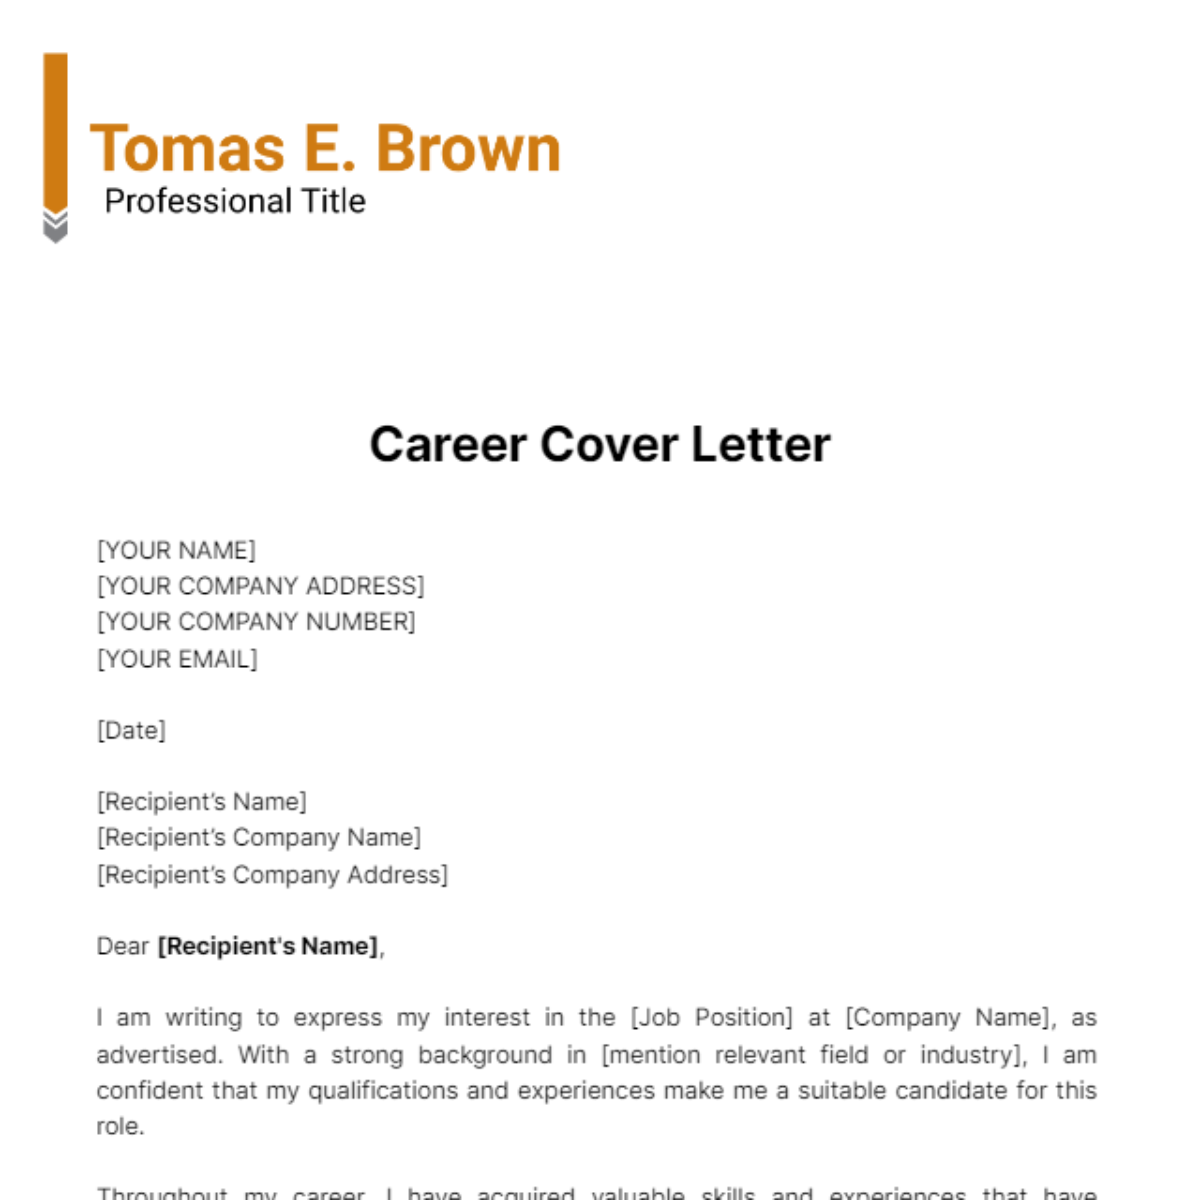 Free Career Cover Letter Template